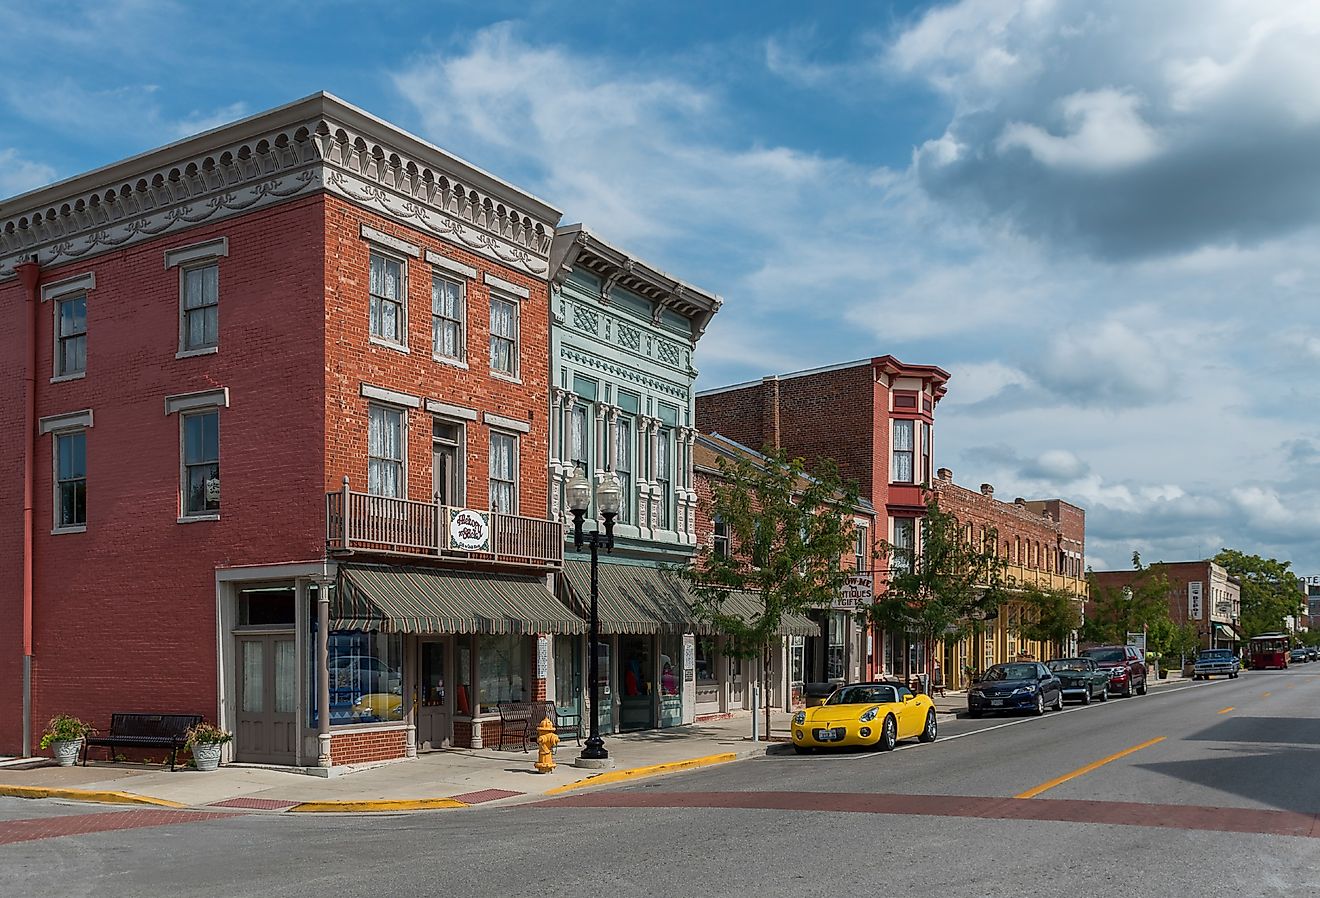 North Main Street Historic District in Hannibal, Missouri in the summer. Image credit Nagel Photography via Shutterstock